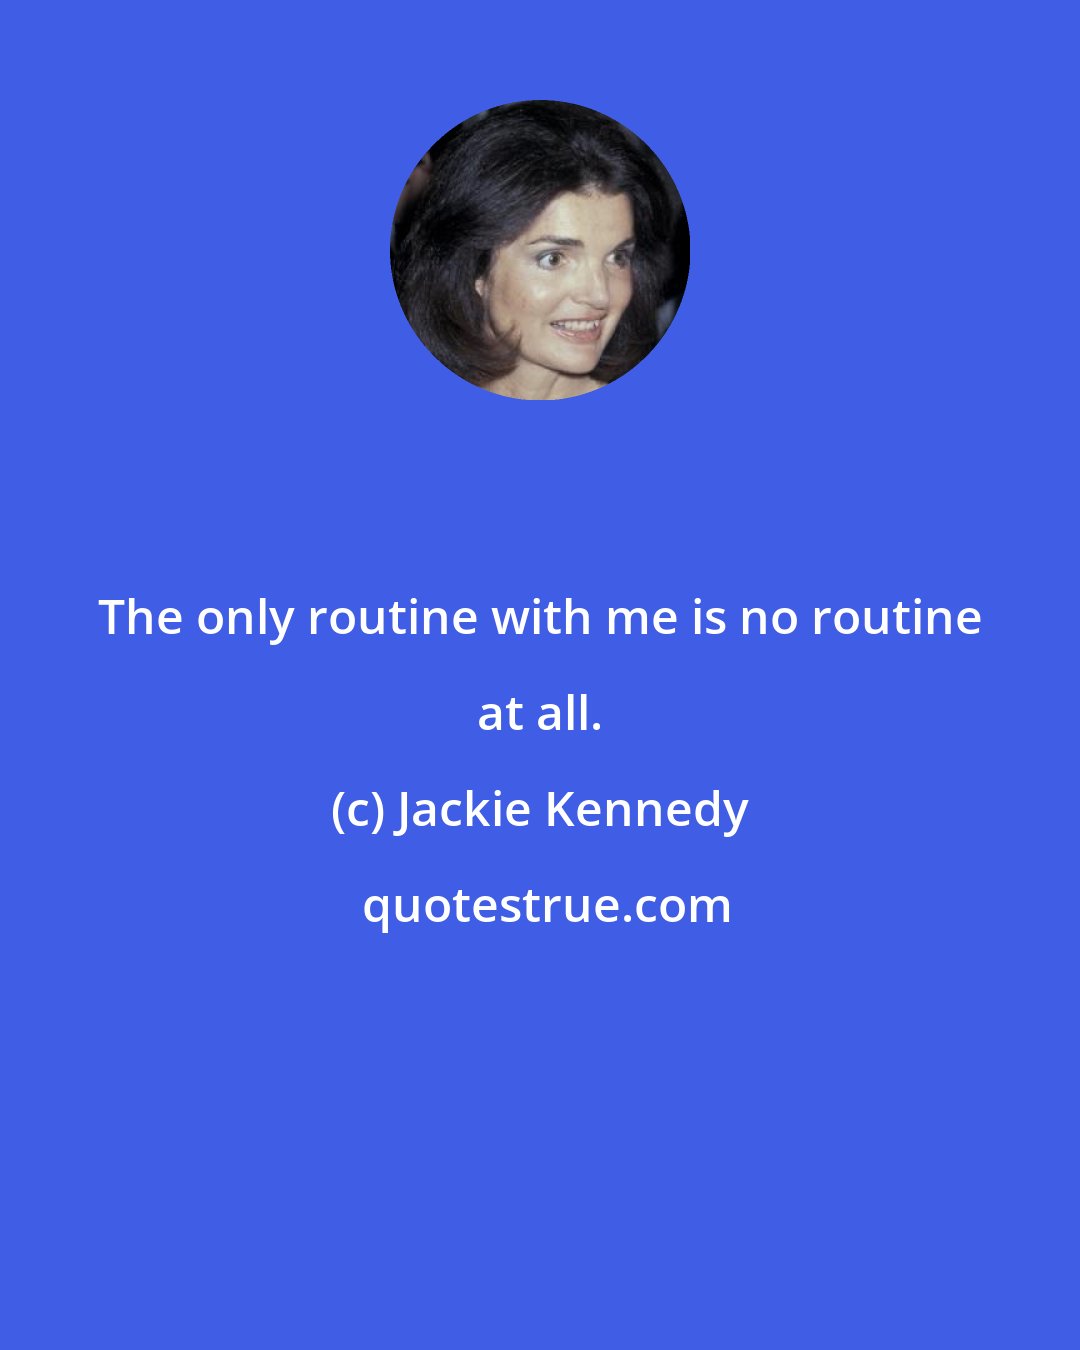 Jackie Kennedy: The only routine with me is no routine at all.